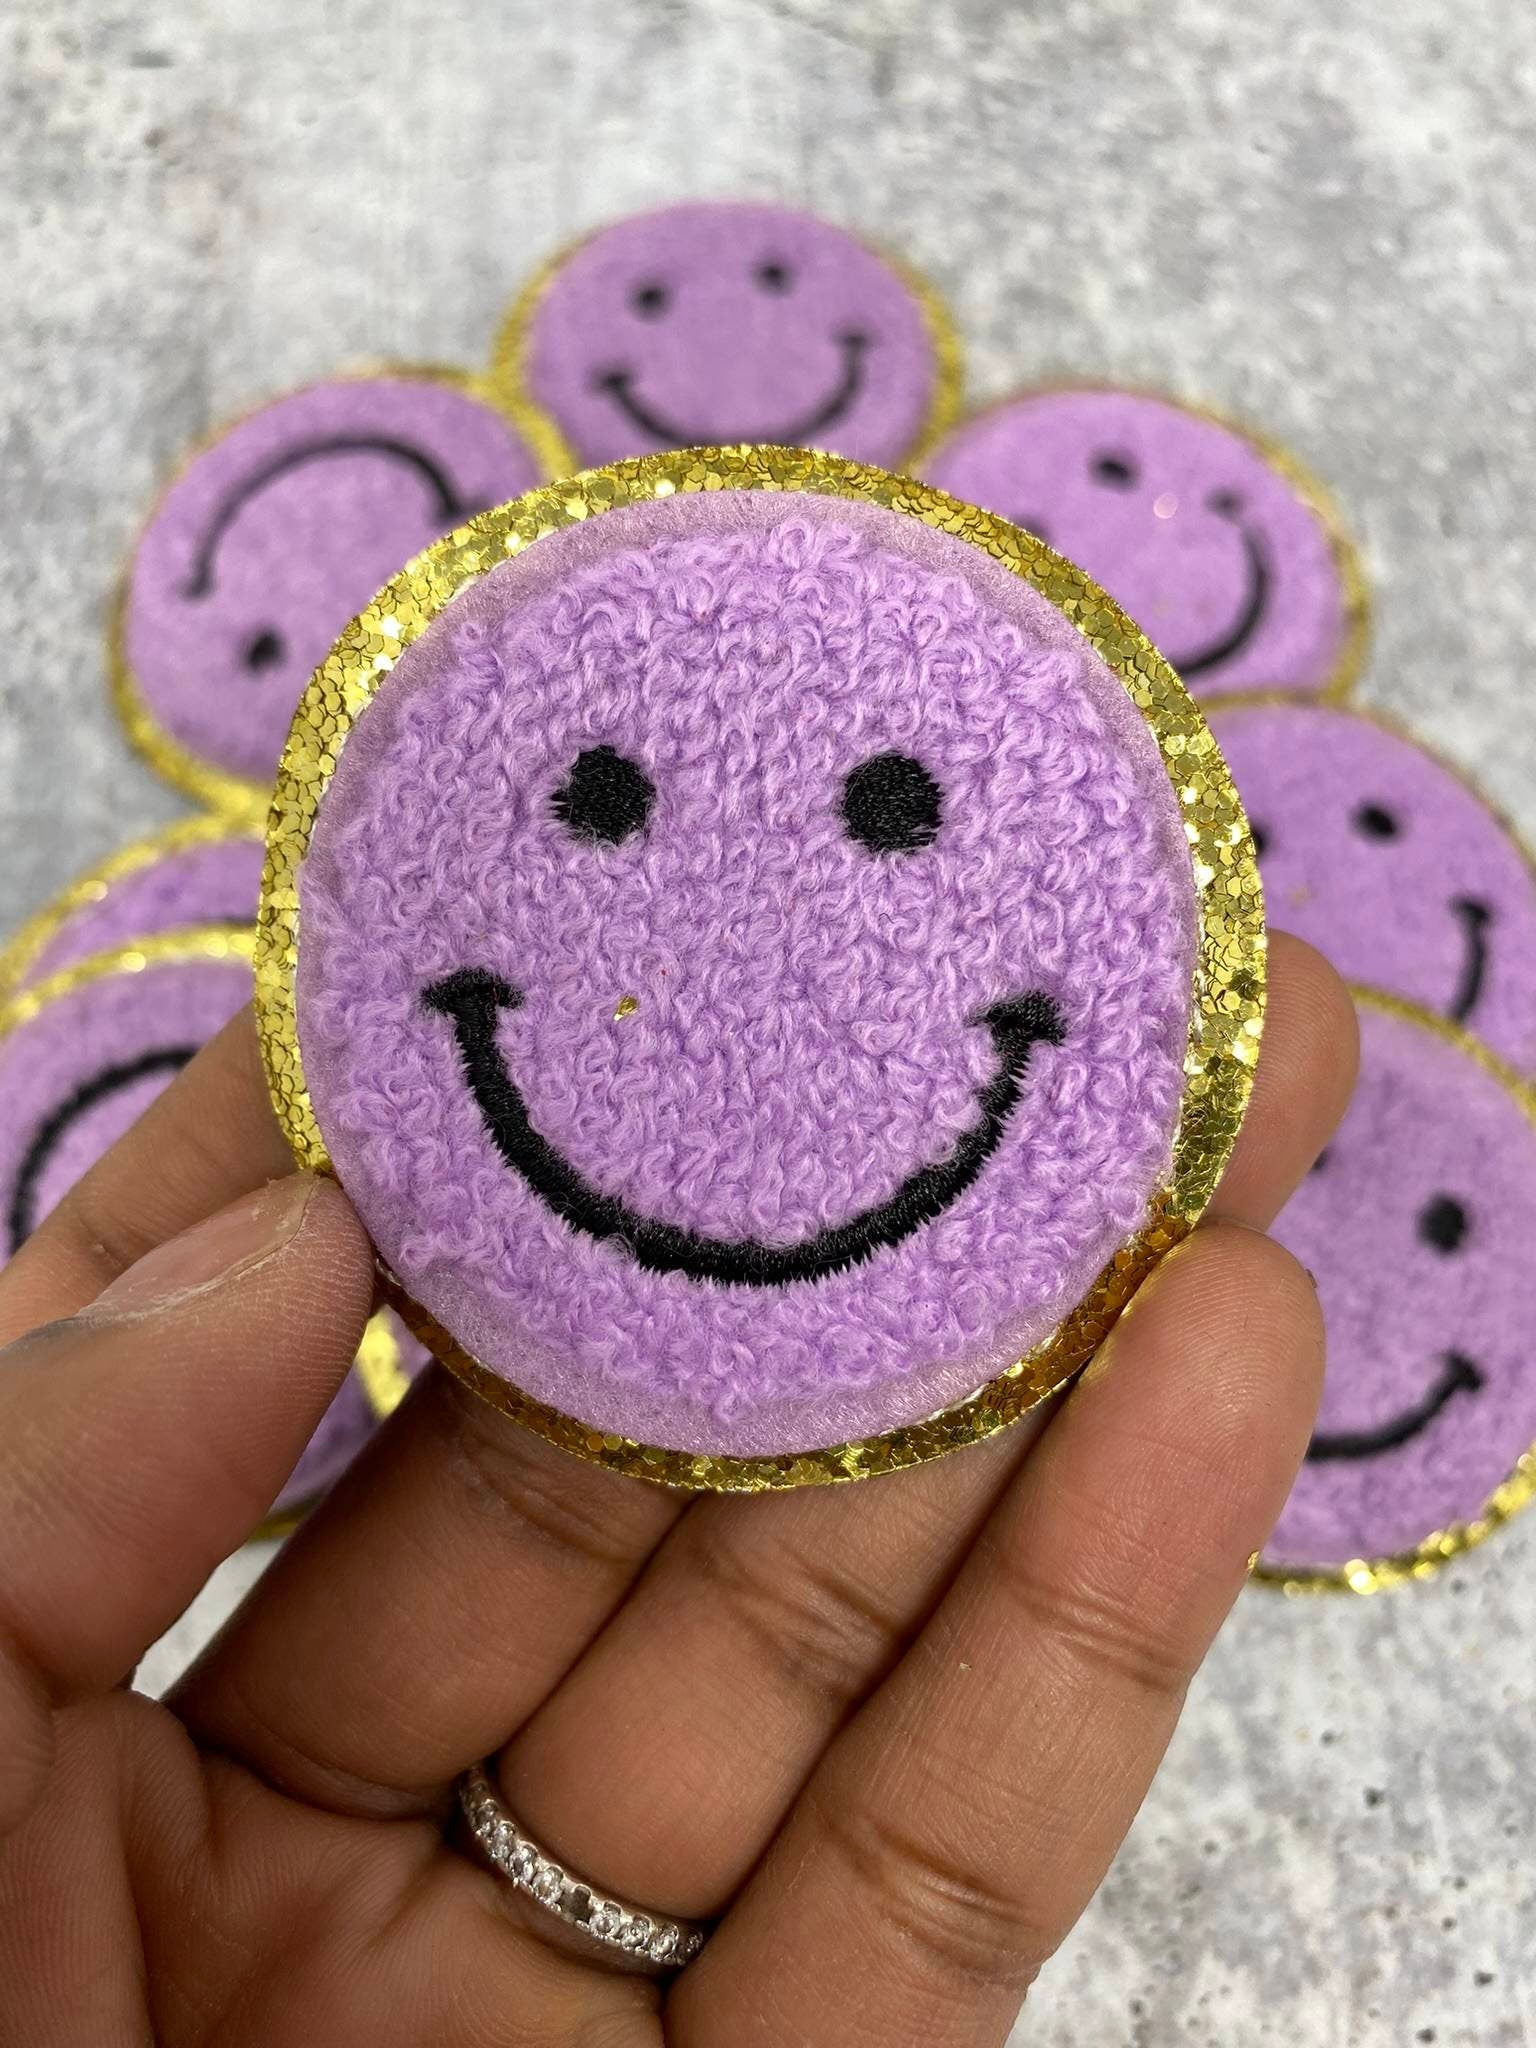 New: Purple, Chenille "Smile Patch" w/ Gold Glitter, Size 2.5", Smiley Face Patch with Iron-on Backing, Fuzzy Happy Face Applique, Fun Patch